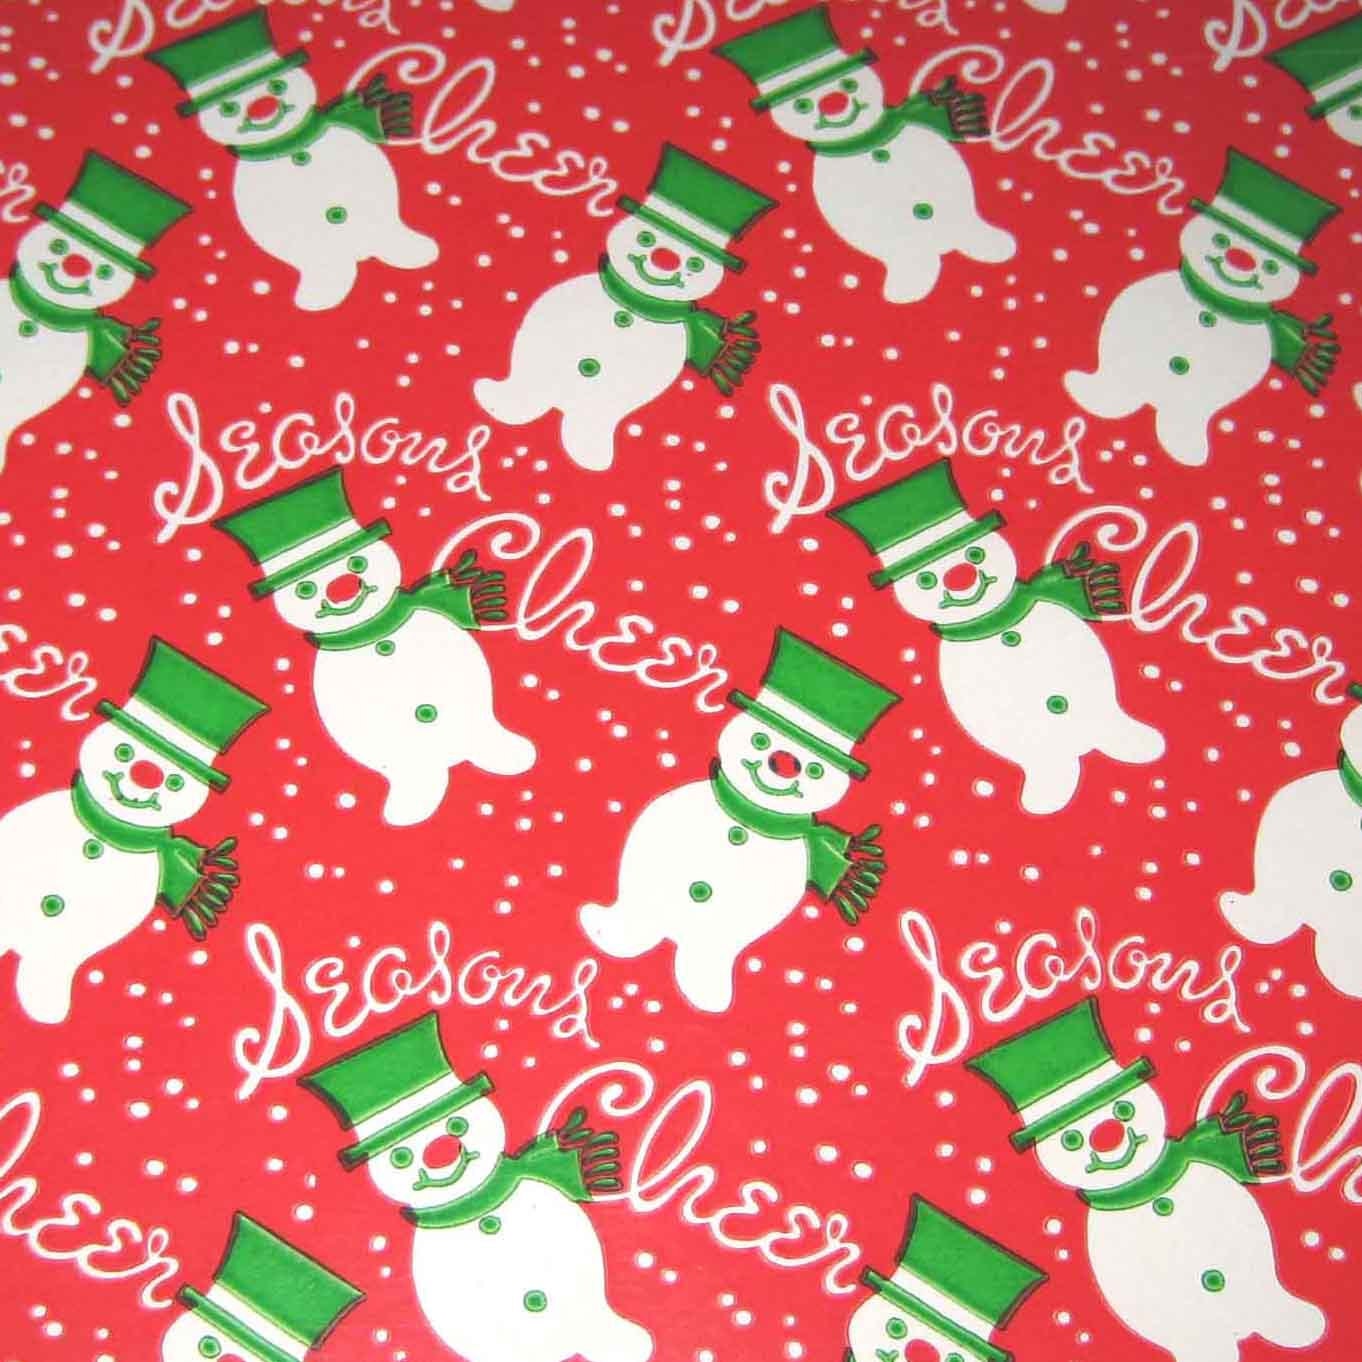 Vintage Christmas Wrapping Paper Lanterns Red Bows Holly & Berries on Green One Flat Sheet Vintage Christmas Gift Wrap